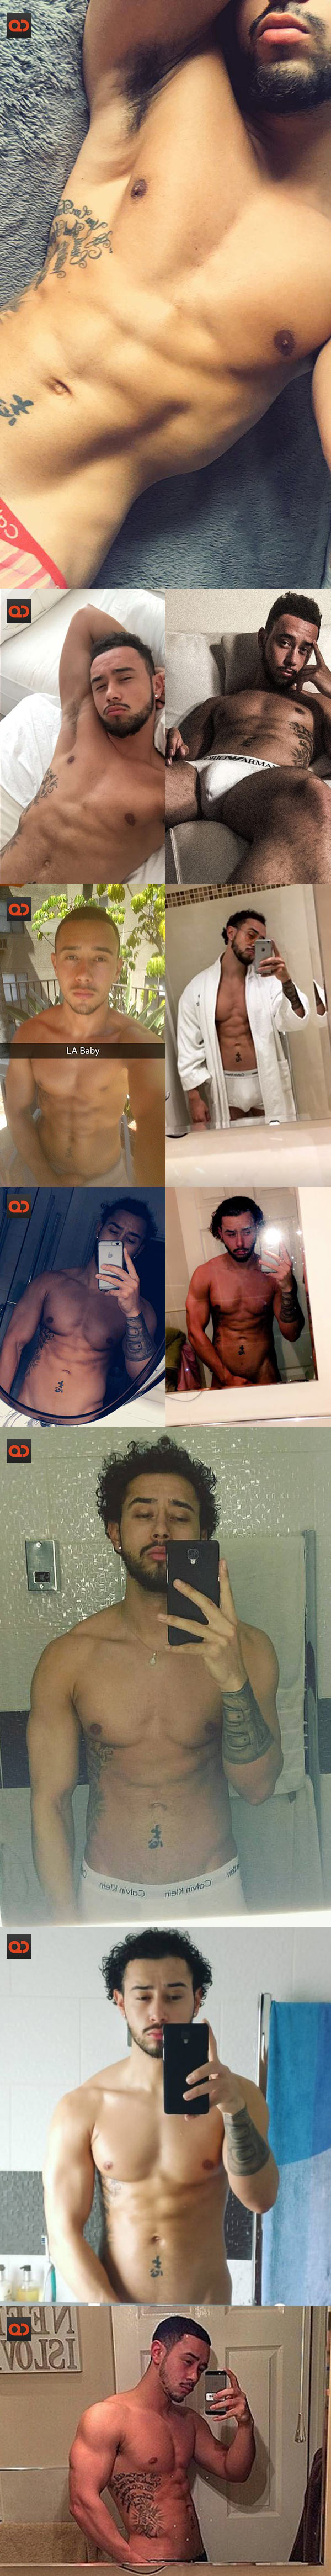 Mason Noise, From X Factor UK, Totally Naked In Leaked Selfies! - Sex Tape  Also Hits! - QueerClick